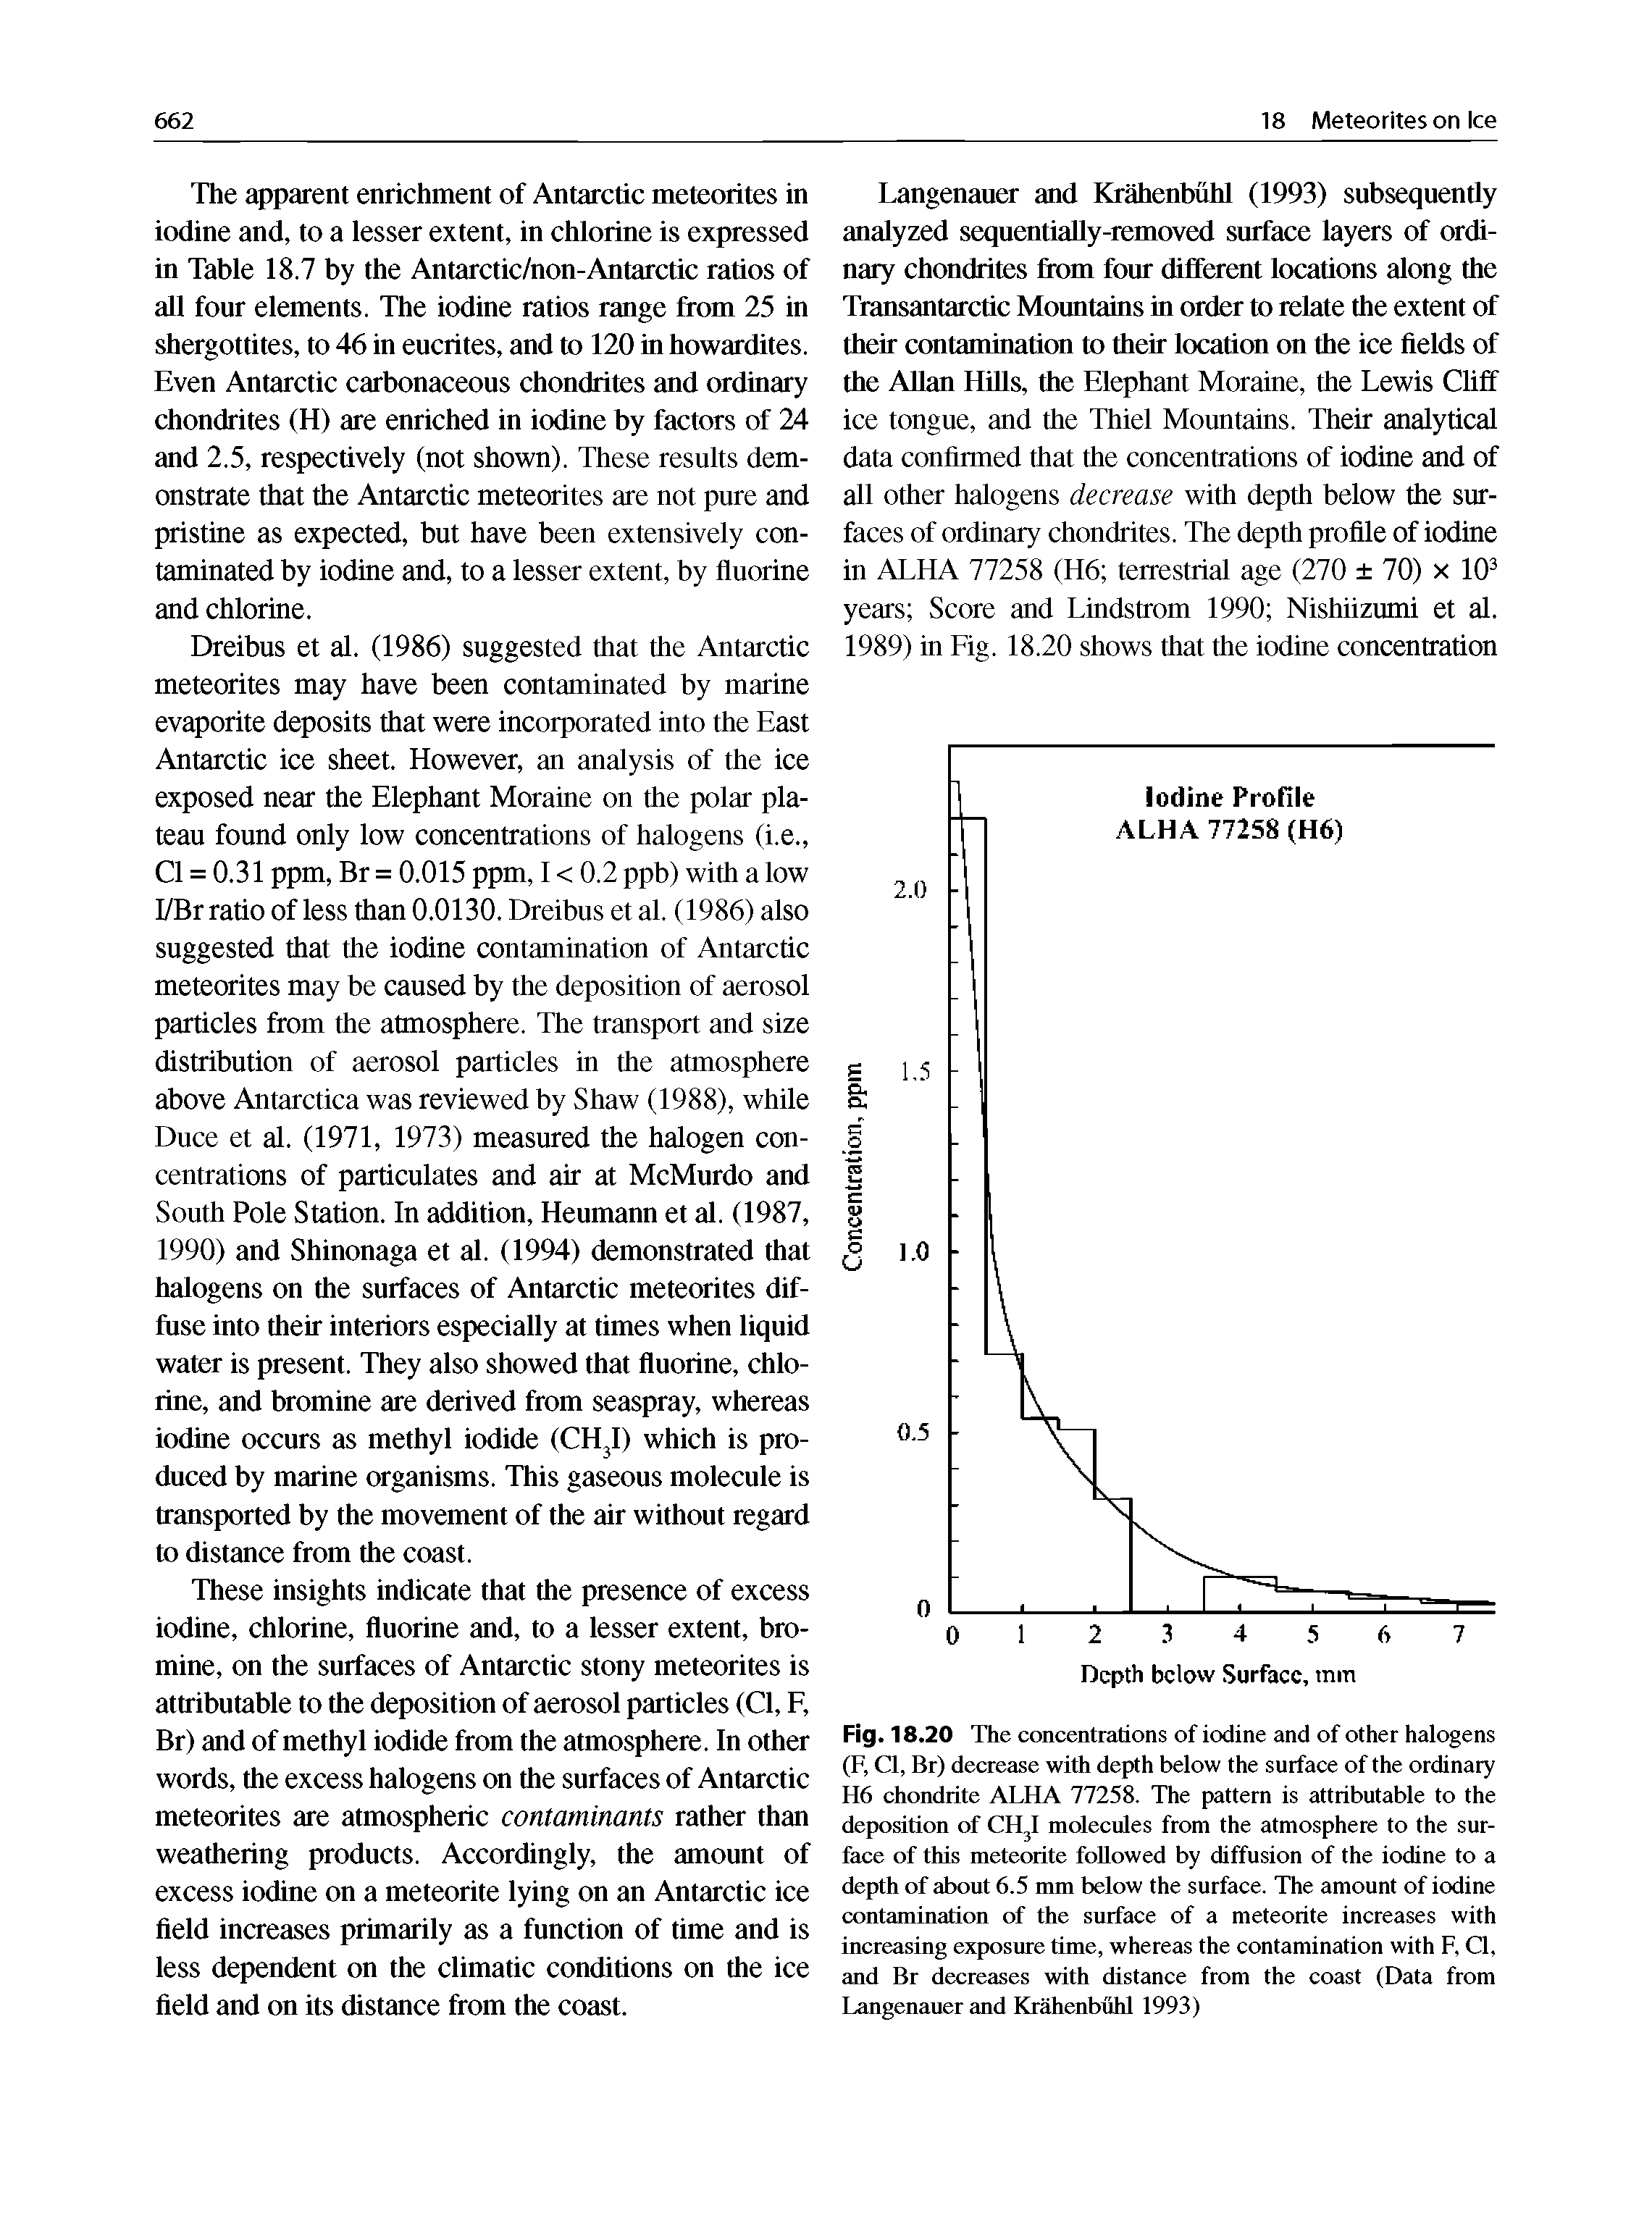 Fig. 18.20 The concentrations of iodine and of other halogens (F, Cl, Br) decrease with depth below the surface of the ordinary H6 chondrite ALHA 77258. The pattern is attributable to the deposition of CH I molecules from the atmosphere to the surface of this meteorite followed by diffusion of the iodine to a depth of about 6.5 mm below the surface. The amount of iodine contamination of the surface of a meteorite increases with increasing exposure time, whereas the contamination with F, Cl, and Br decreases with distance from the coast (Data from Langenauer and Krahenbuhl 1993)...